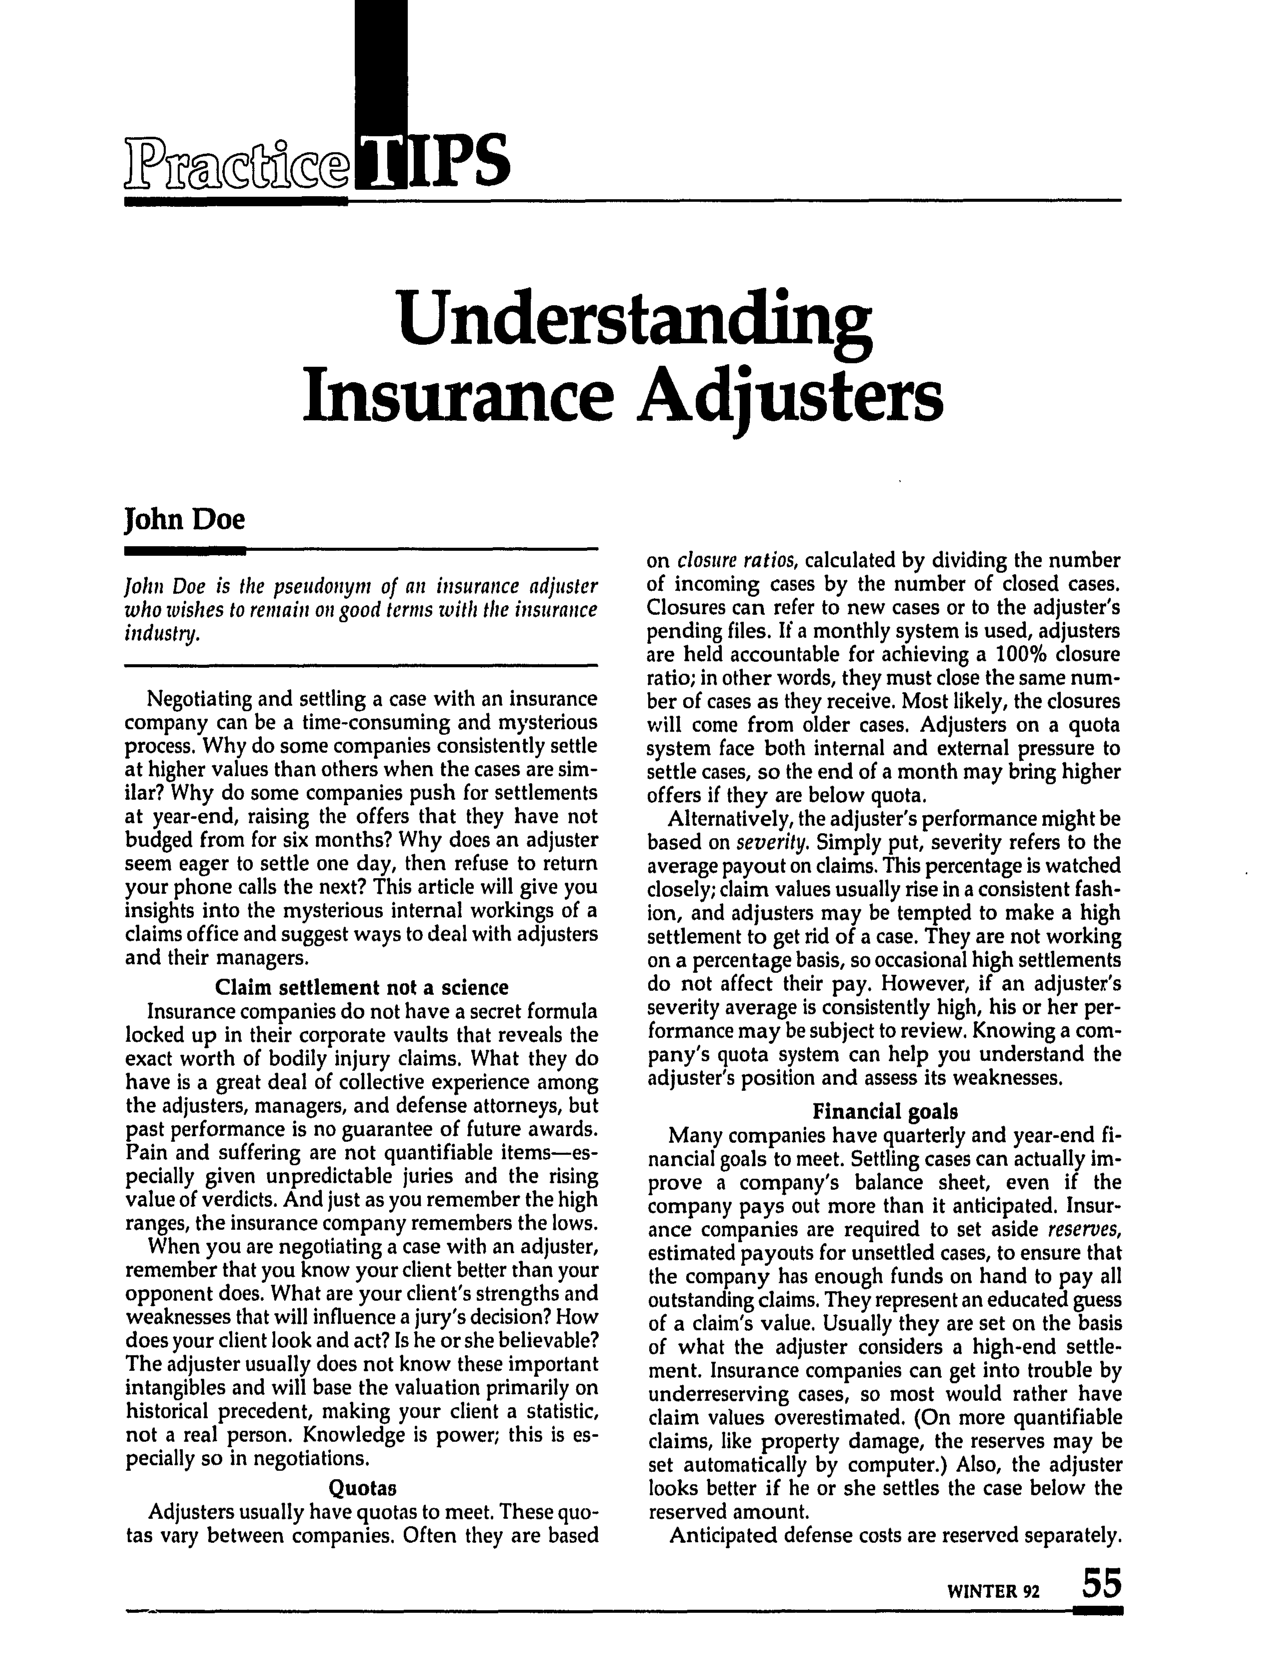 handle is hein.journals/tbrief21 and id is 117 raw text is: IPS

Understanding
Insurance Adjusters

John Doe
John Doe is the pseudonym of an insurance adjuster
who wishes to remain on good terms with the insurance
industry.
Negotiating and settling a case with an insurance
company can be a time-consuming and mysterious
process. Why do some companies consistently settle
at higher values than others when the cases are sim-
ilar? Why do some companies push for settlements
at year-end, raising the offers that they have not
budged from for six months? Why does an adjuster
seem eager to settle one day, then refuse to return
your phone calls the next? This article will give you
insights into the mysterious internal workings of a
claims office and suggest ways to deal with adjusters
and their managers.
Claim settlement not a science
Insurance companies do not have a secret formula
locked up in their corporate vaults that reveals the
exact worth of bodily injury claims. What they do
have is a great deal of collective experience among
the adjusters, managers, and defense attorneys, but
past performance is no guarantee of future awards.
Pain and suffering are not quantifiable items-es-
pecially given unpredictable juries and the rising
value of verdicts. And just as you remember the high
ranges, the insurance company remembers the lows.
When you are negotiating a case with an adjuster,
remember that you know your client better than your
opponent does. What are your client's strengths and
weaknesses that will influence a jury's decision? How
does your client look and act? Is he or she believable?
The adjuster usually does not know these important
intangibles and will base the valuation primarily on
historical precedent, making your client a statistic,
not a real person. Knowledge is power; this is es-
pecially so in negotiations.
Quotas
Adjusters usually have quotas to meet. These quo-
tas vary between companies. Often they are based

on closure ratios, calculated by dividing the number
of incoming cases by the number of closed cases.
Closures can refer to new cases or to the adjuster's
pending files. If a monthly system is used, adjusters
are held accountable for achieving a 100% closure
ratio; in other words, they must close the same num-
ber of cases as they receive. Most likely, the closures
will come from older cases. Adjusters on a quota
system face both internal and external pressure to
settle cases, so the end of a month may bring higher
offers if they are below quota.
Alternatively, the adjuster's performance might be
based on severity. Simply put, severity refers to the
average payout on claims. This percentage is watched
closely; claim values usually rise in a consistent fash-
ion, and adjusters may be tempted to make a high
settlement to get rid of a case. They are not working
on a percentage basis, so occasional high settlements
do not affect their pay. However, if an adjuster's
severity average is consistently high, his or her per-
formance may be subject to review. Knowing a com-
pany's quota system can help you understand the
adjuster's position and assess its weaknesses.
Financial goals
Many companies have quarterly and year-end fi-
nancial goals to meet. Settling cases can actually im-
prove a company's balance sheet, even if the
company pays out more than it anticipated. Insur-
ance companies are required to set aside reserves,
estimated payouts for unsettled cases, to ensure that
the company has enough funds on hand to pay all
outstanding claims. They represent an educated guess
of a claim's value. Usually they are set on the basis
of what the adjuster considers a high-end settle-
ment. Insurance companies can get into trouble by
underreserving cases, so most would rather have
claim values overestimated. (On more quantifiable
claims, like property damage, the reserves may be
set automatically by computer.) Also, the adjuster
looks better if he or she settles the case below the
reserved amount.
Anticipated defense costs are reserved separately.

WINTER 92   55

LP)TECNOCT


